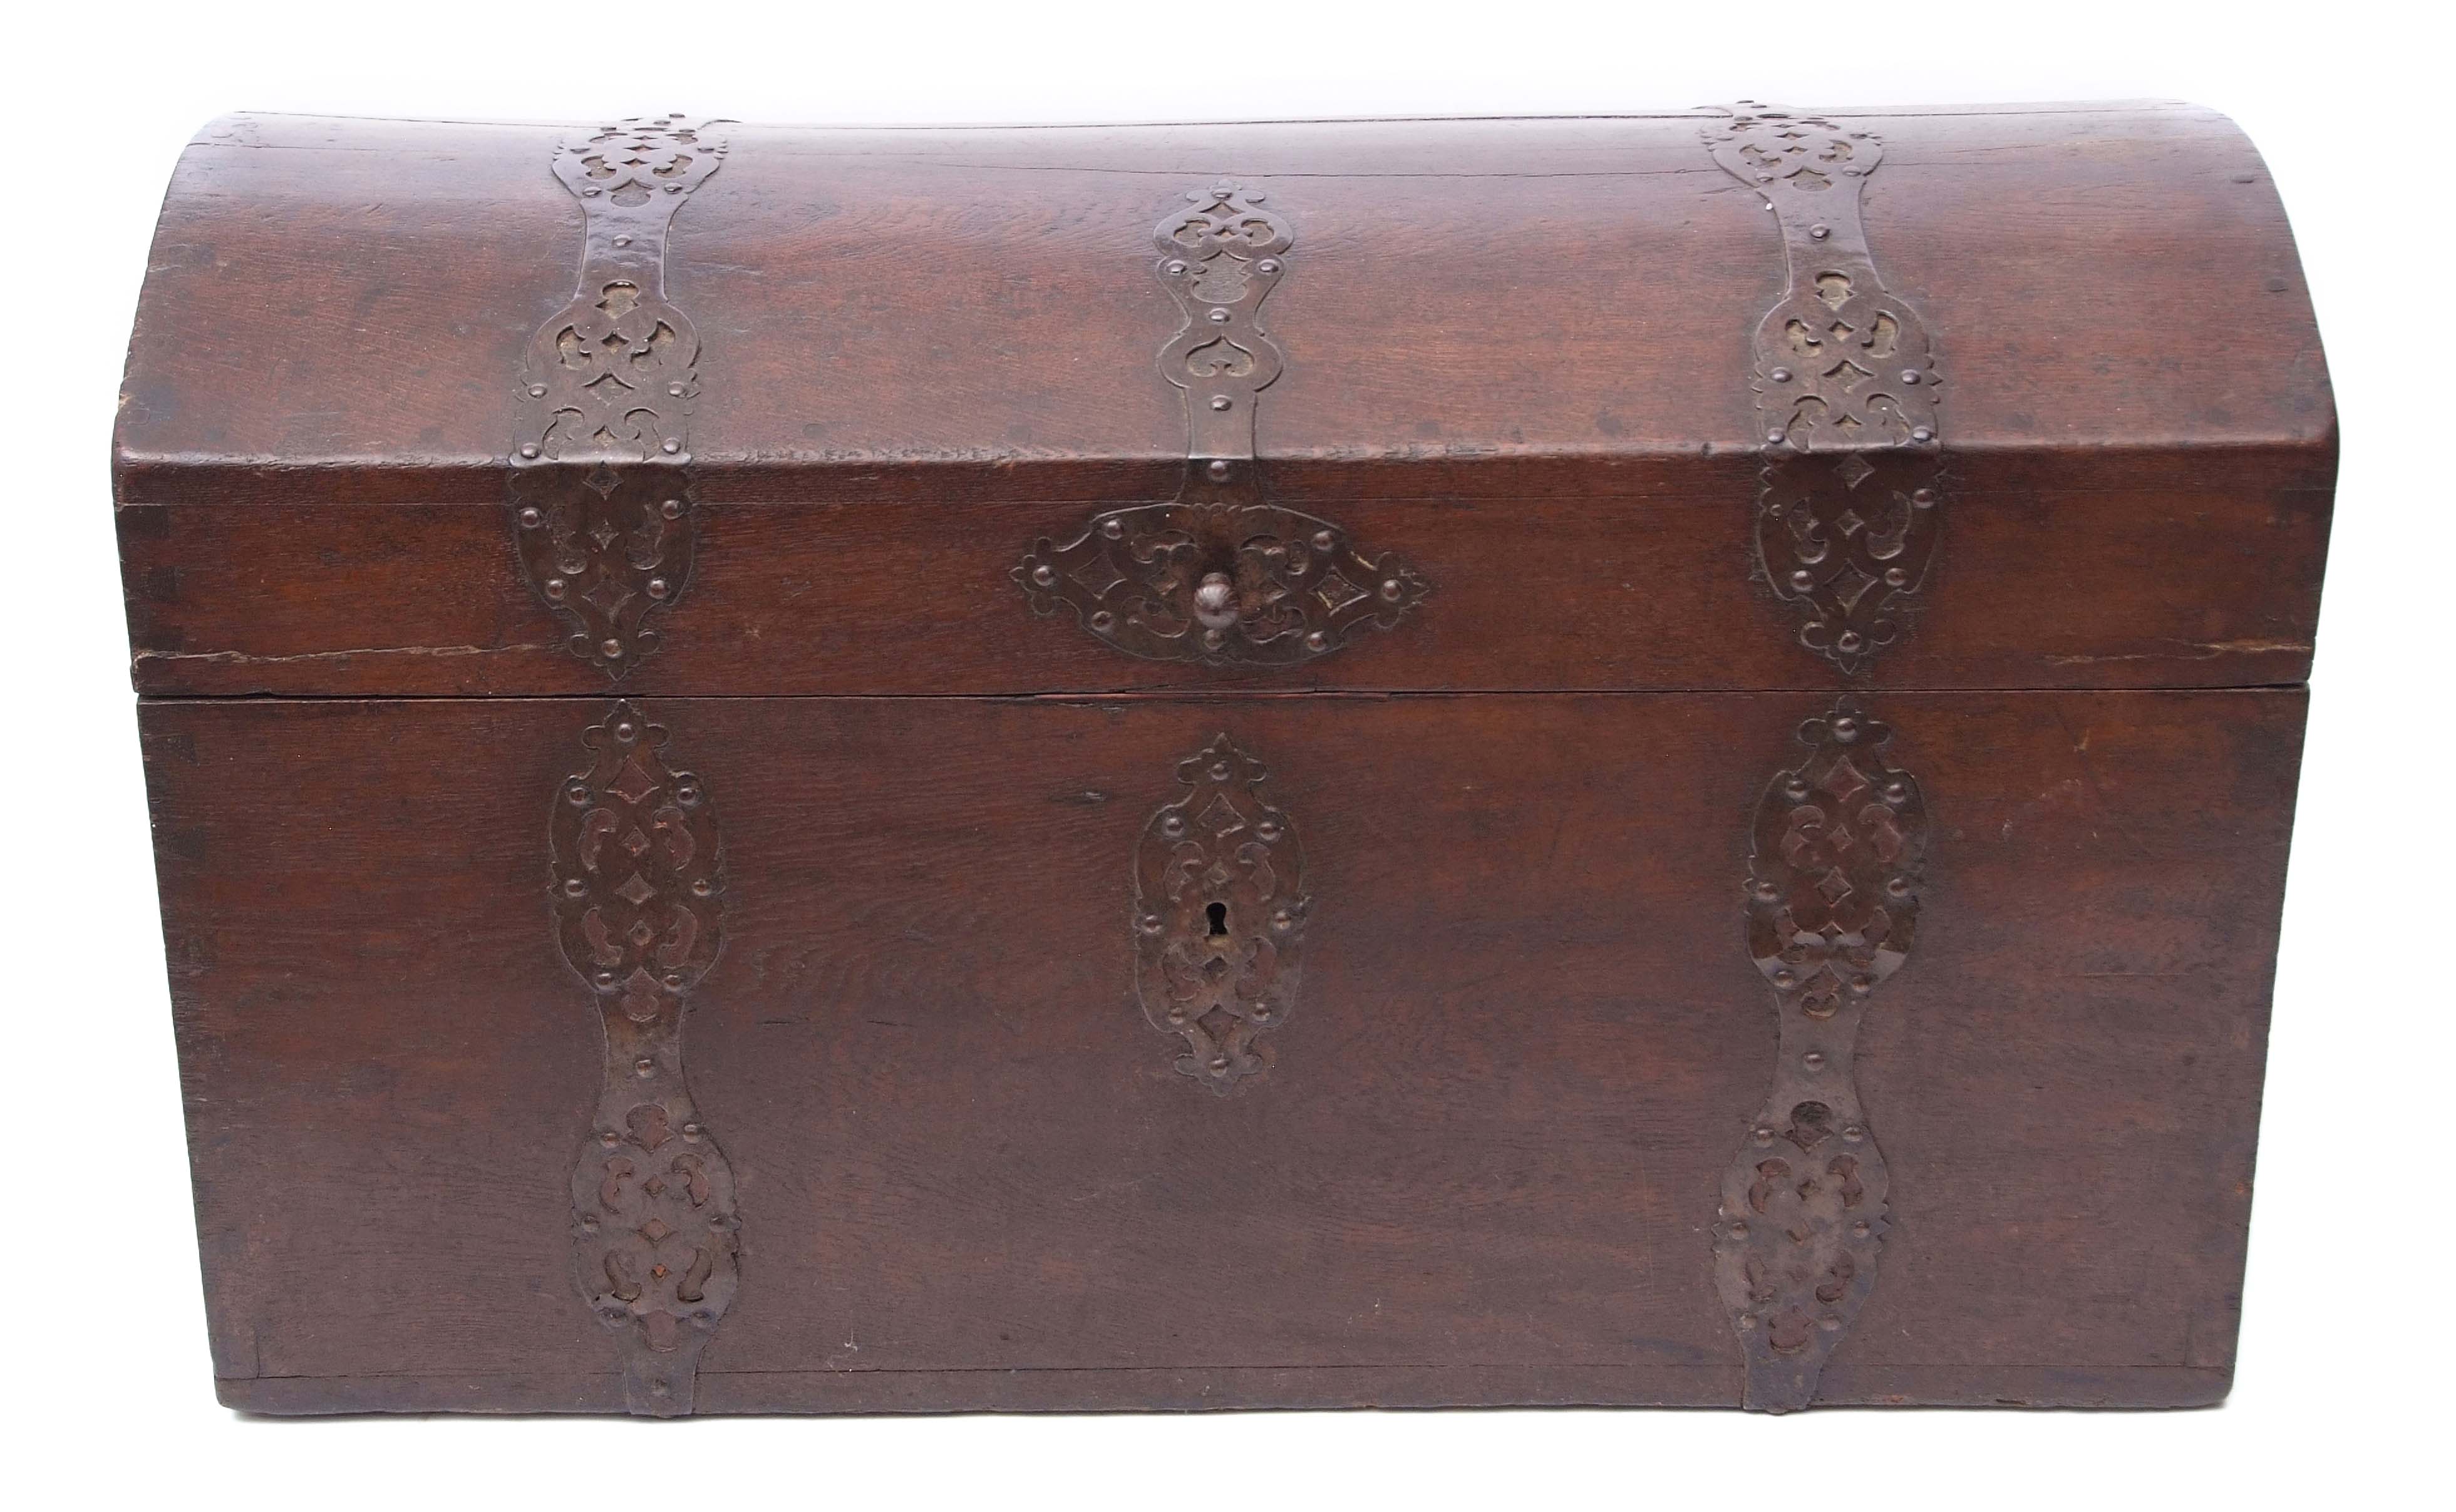 Heavy oak trunk or coffer with domed top and pierced metal strapwork mounts, applied at either end